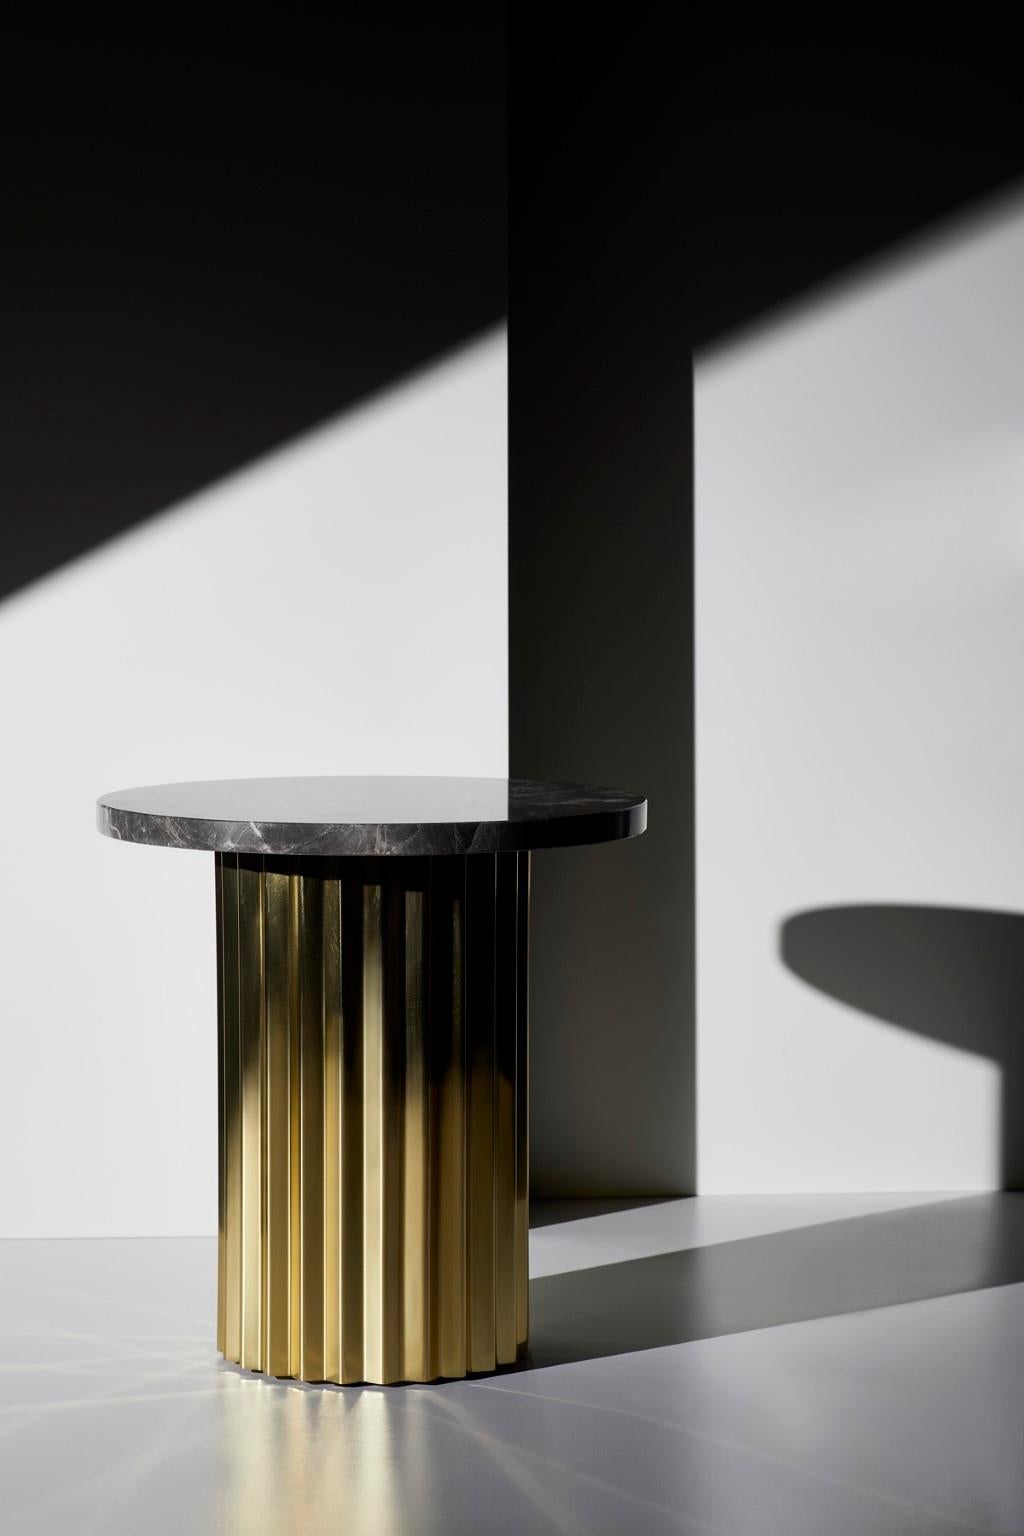 Column lounge table by Lisette Rützou
Dimensions: D 40 x H 41 cm
Materials: Brass column with marble tabletop
Also available Ø 60

 Lisette Rützou’s design is motivated by an urge to articulate a story. Inspired by the beauty of materials, form